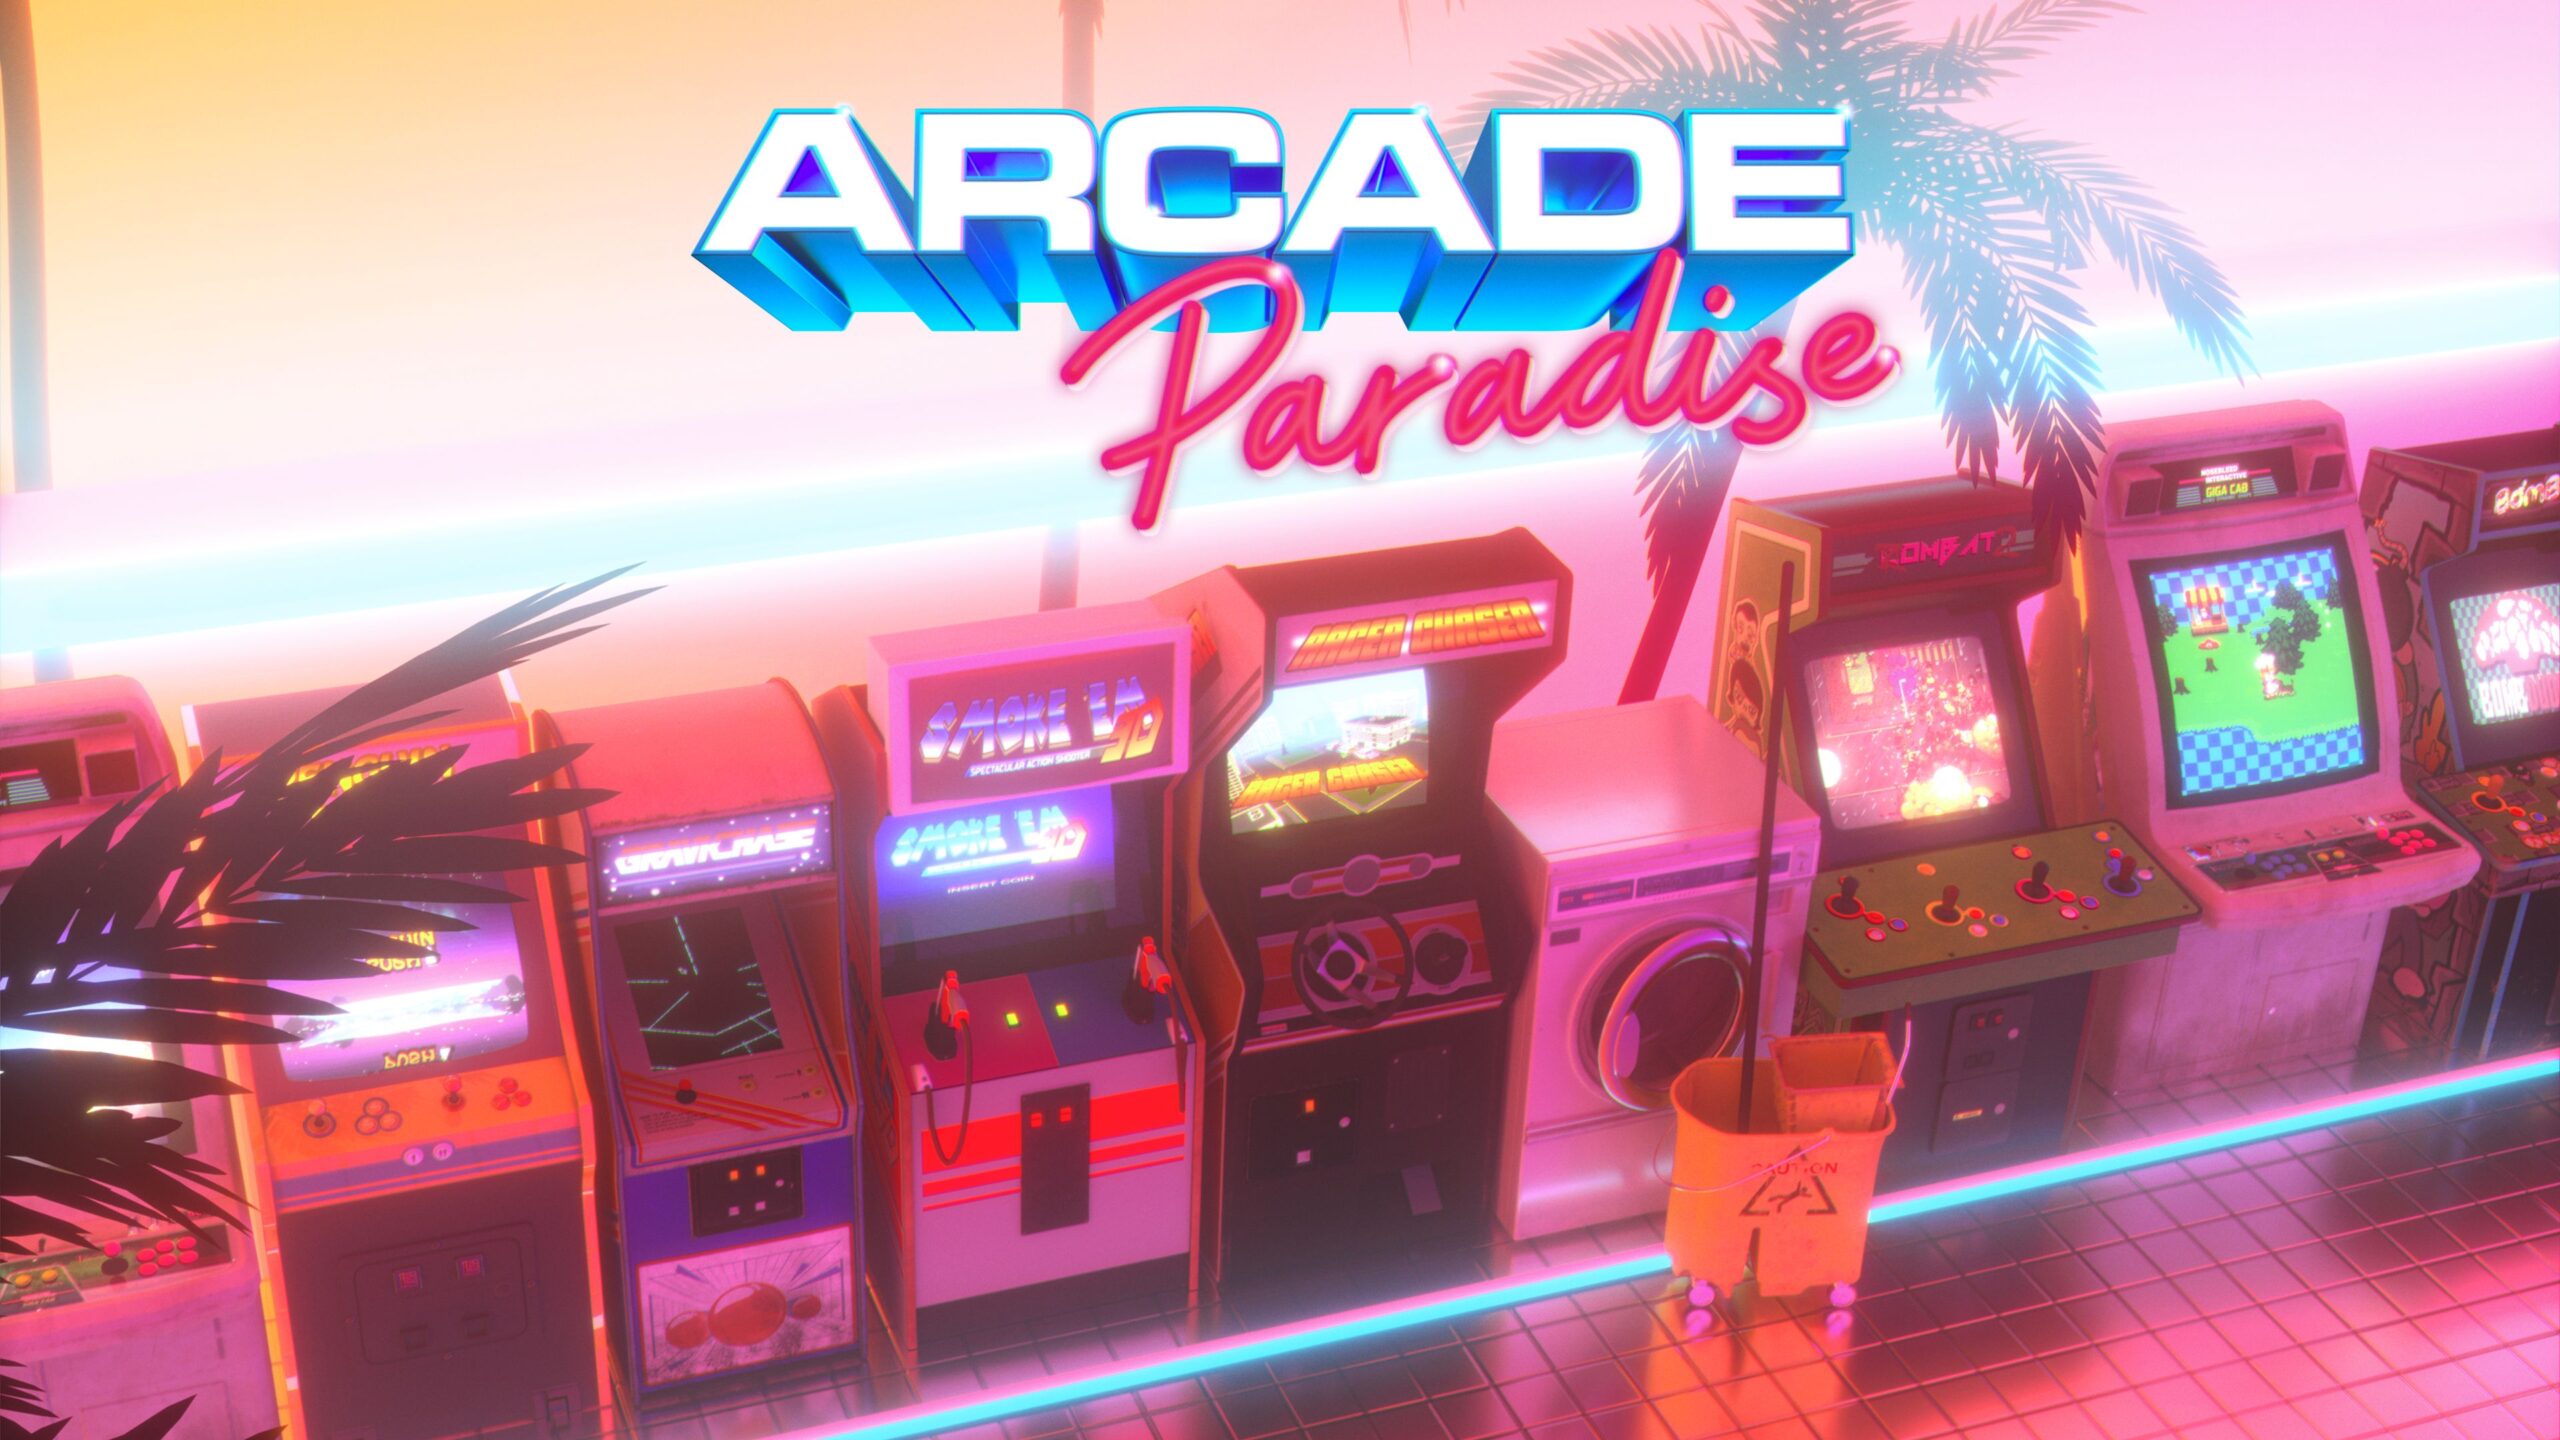 Arcade Management Game Arcade Paradise Announced for PC and Consoles